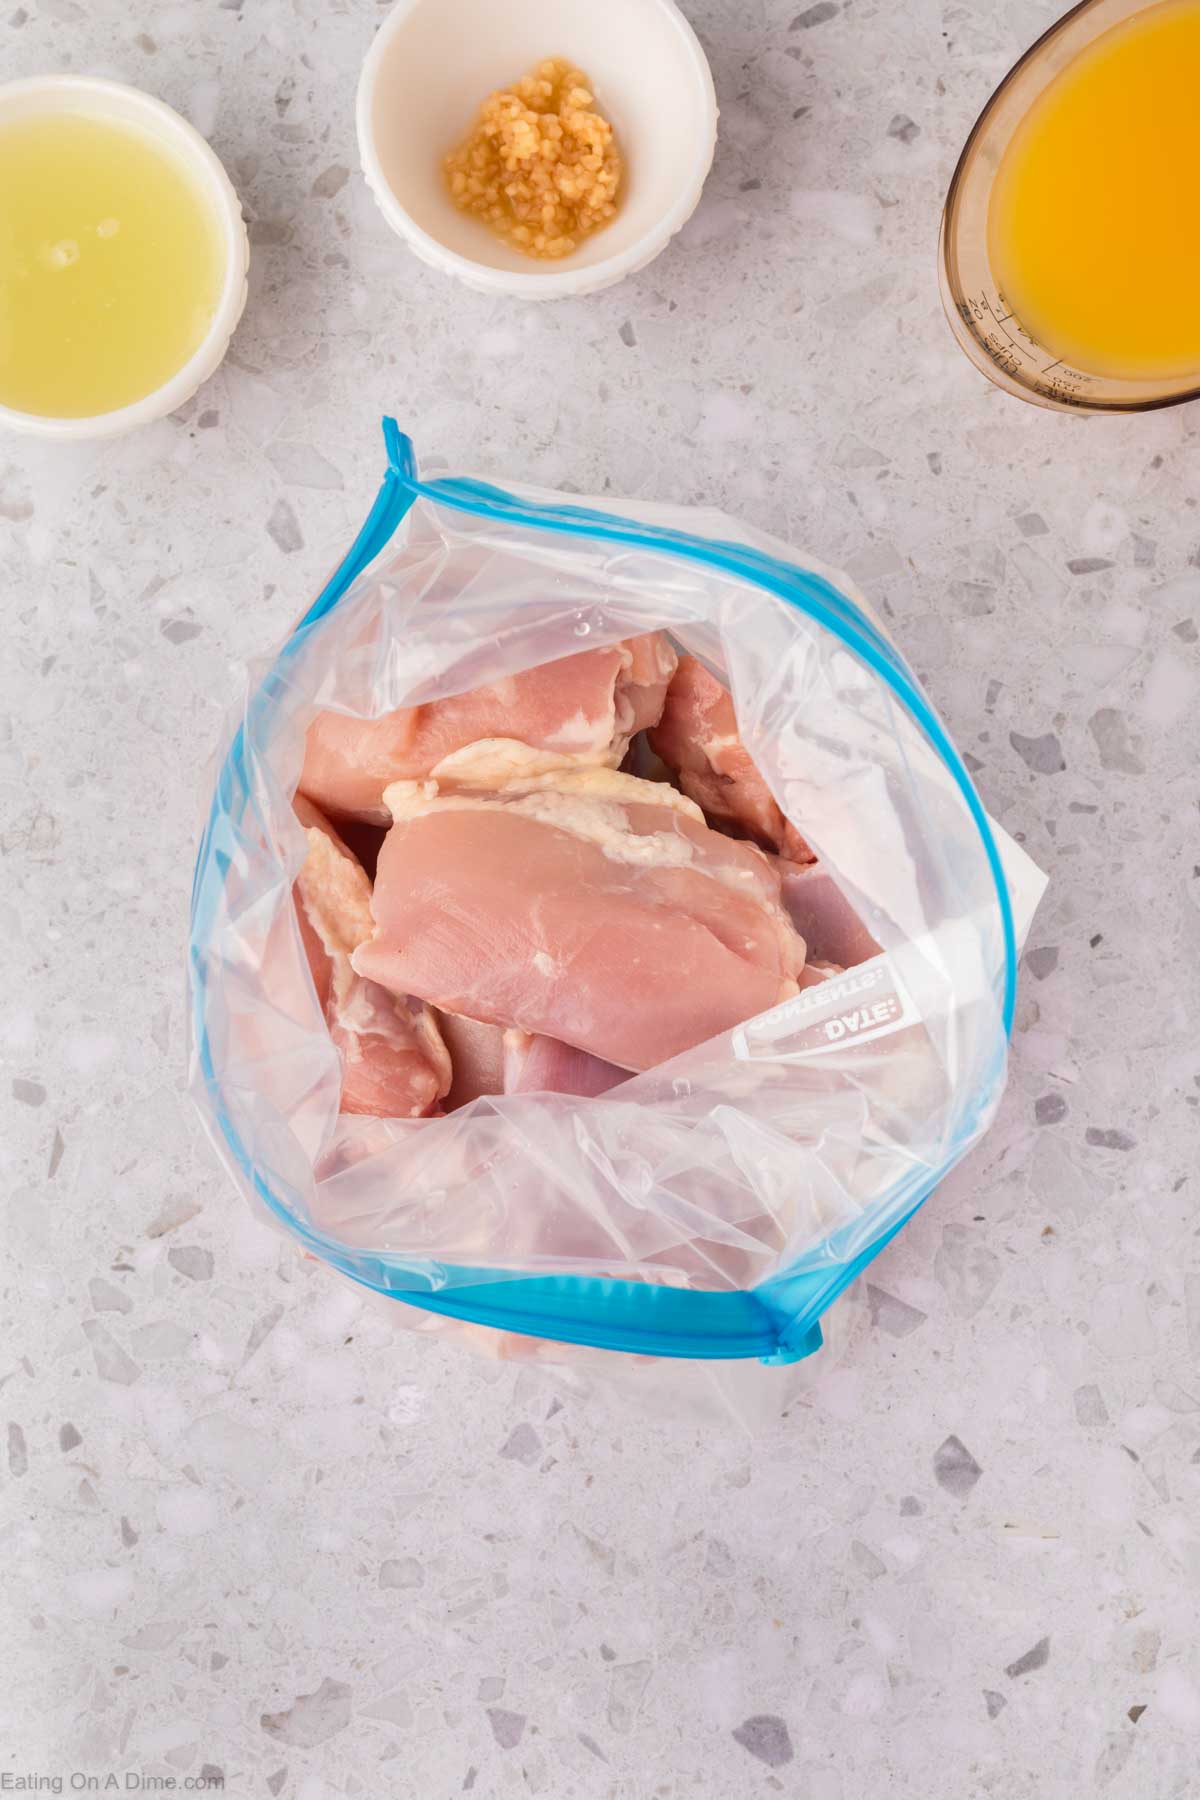 Chicken thighs placed in a ziplock bag with bowls of lime juice, minced garlic and orange juice